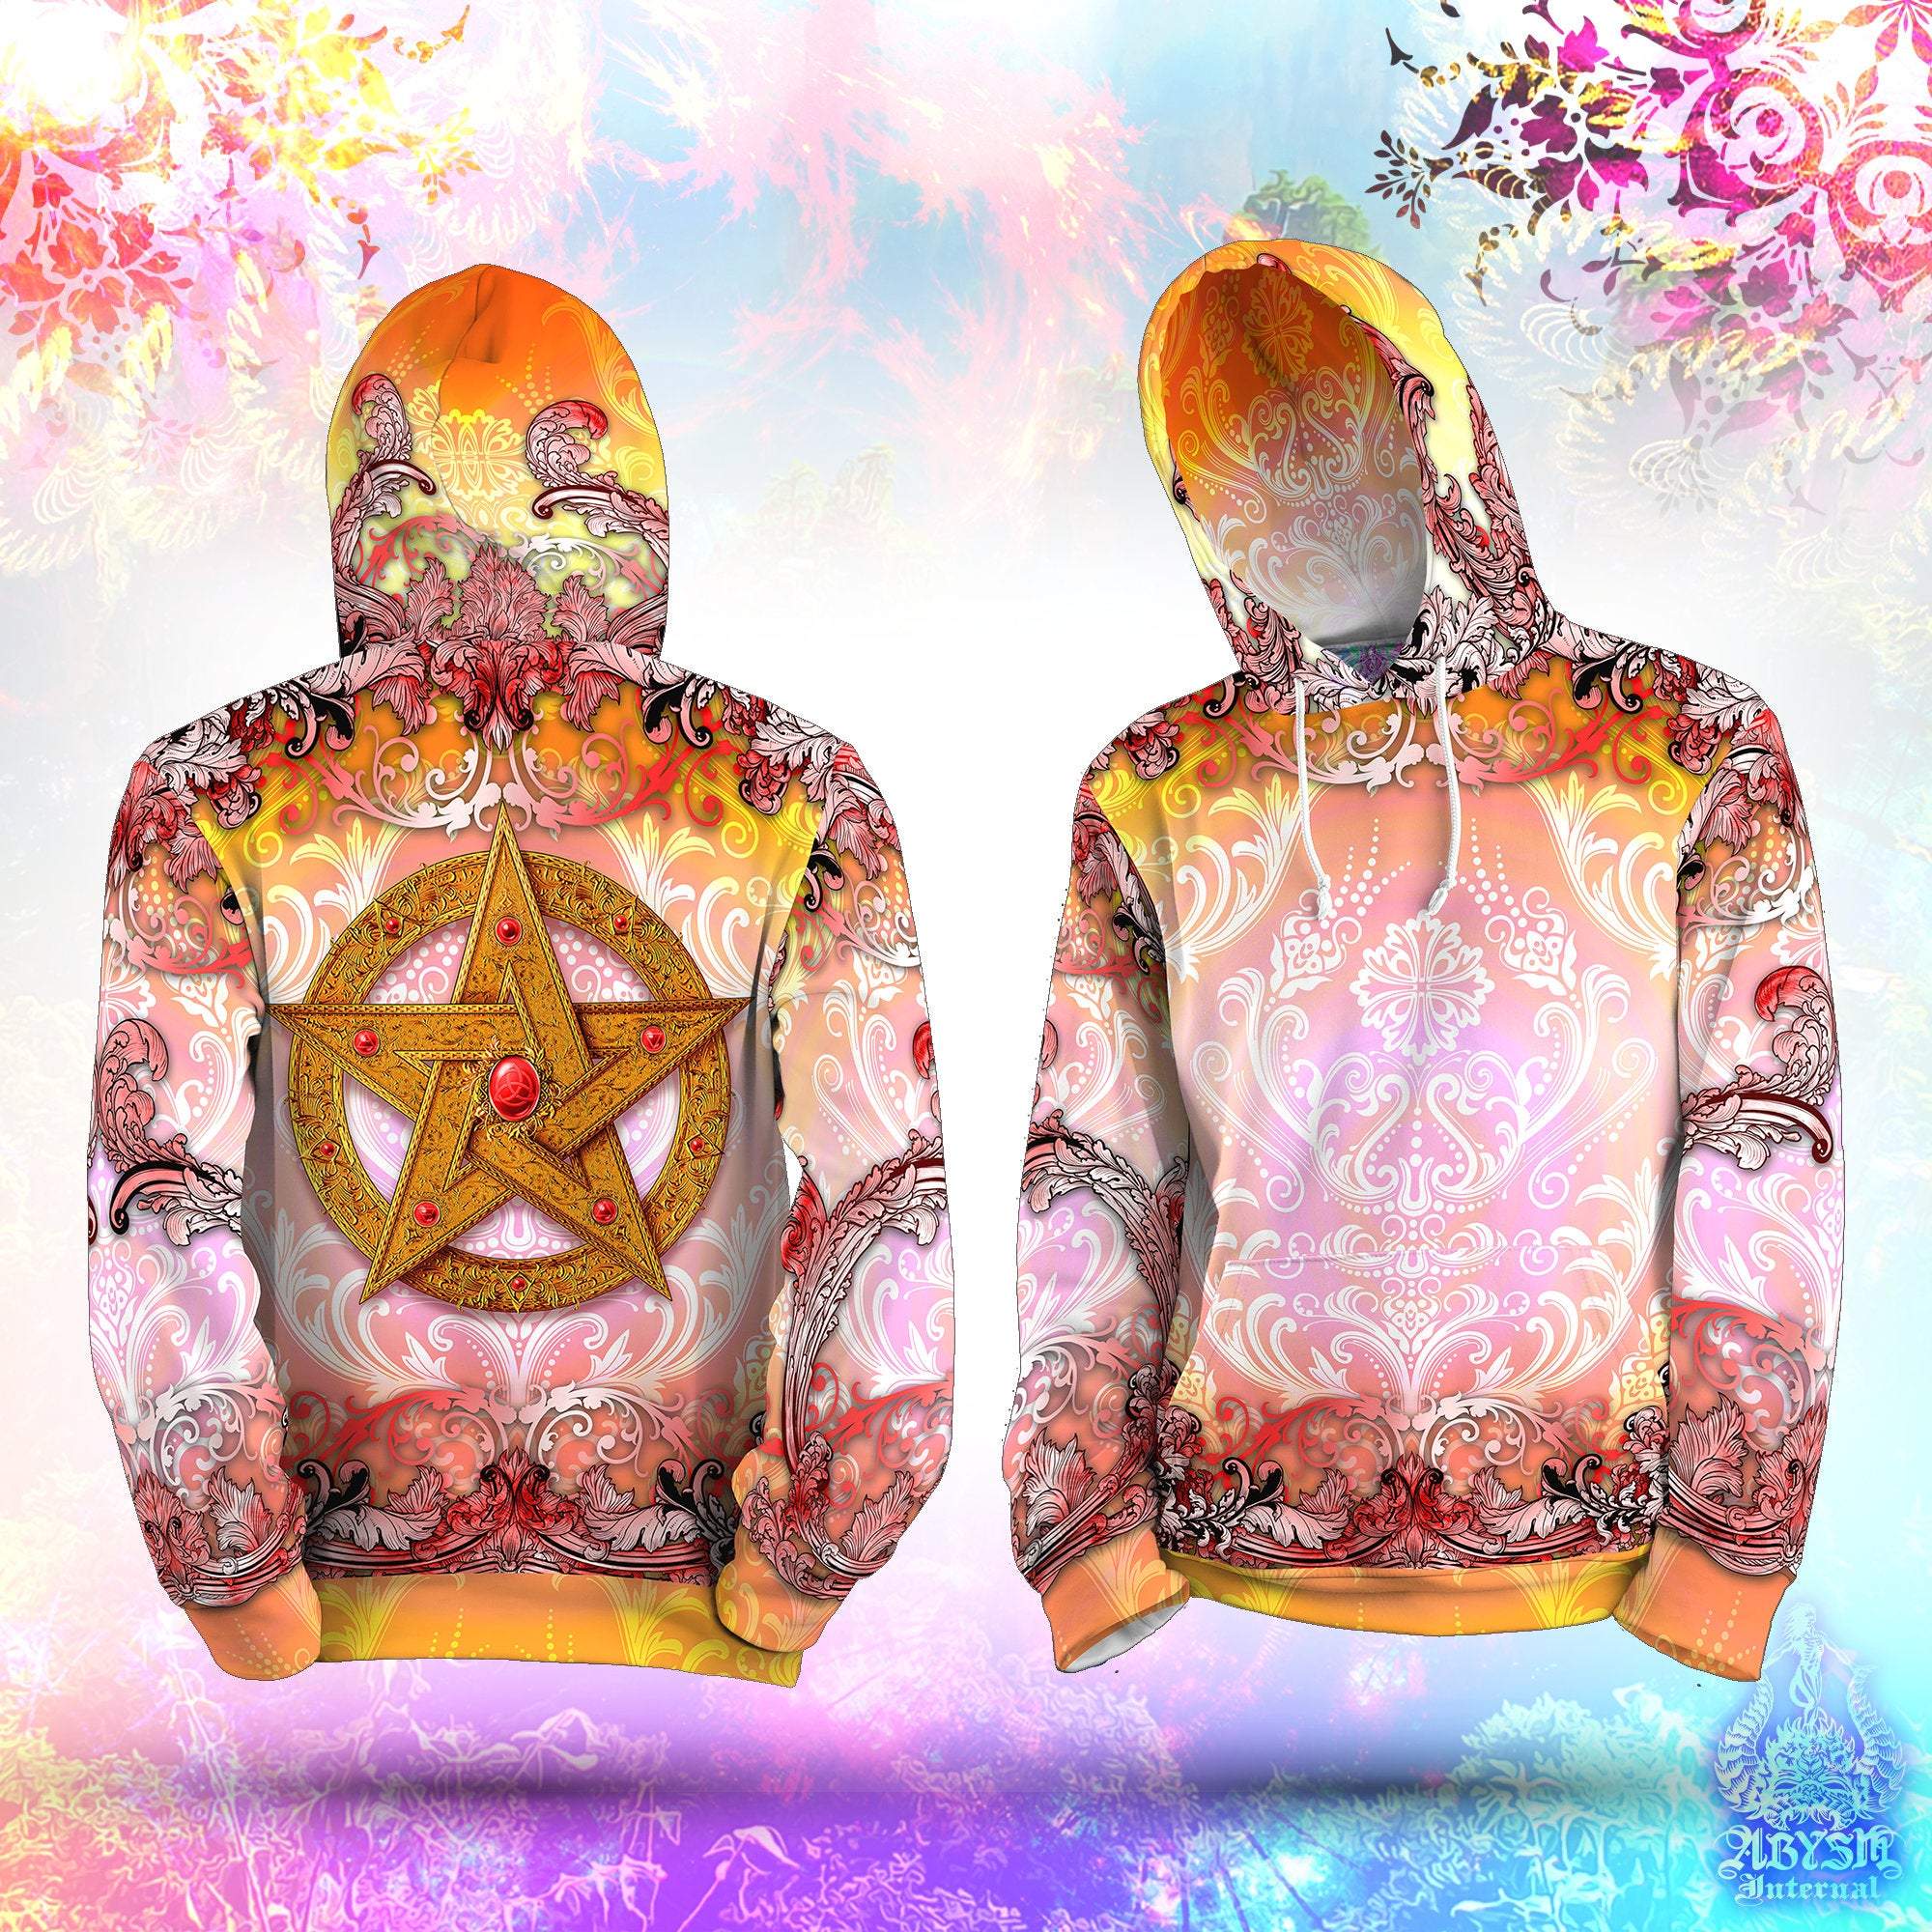 Pagan Hoodie, Witchy Outfit, Wiccan Streetwear, Witch Apparel, Alternative Clothing, Unisex - Pentacle, Red Yellow - Abysm Internal